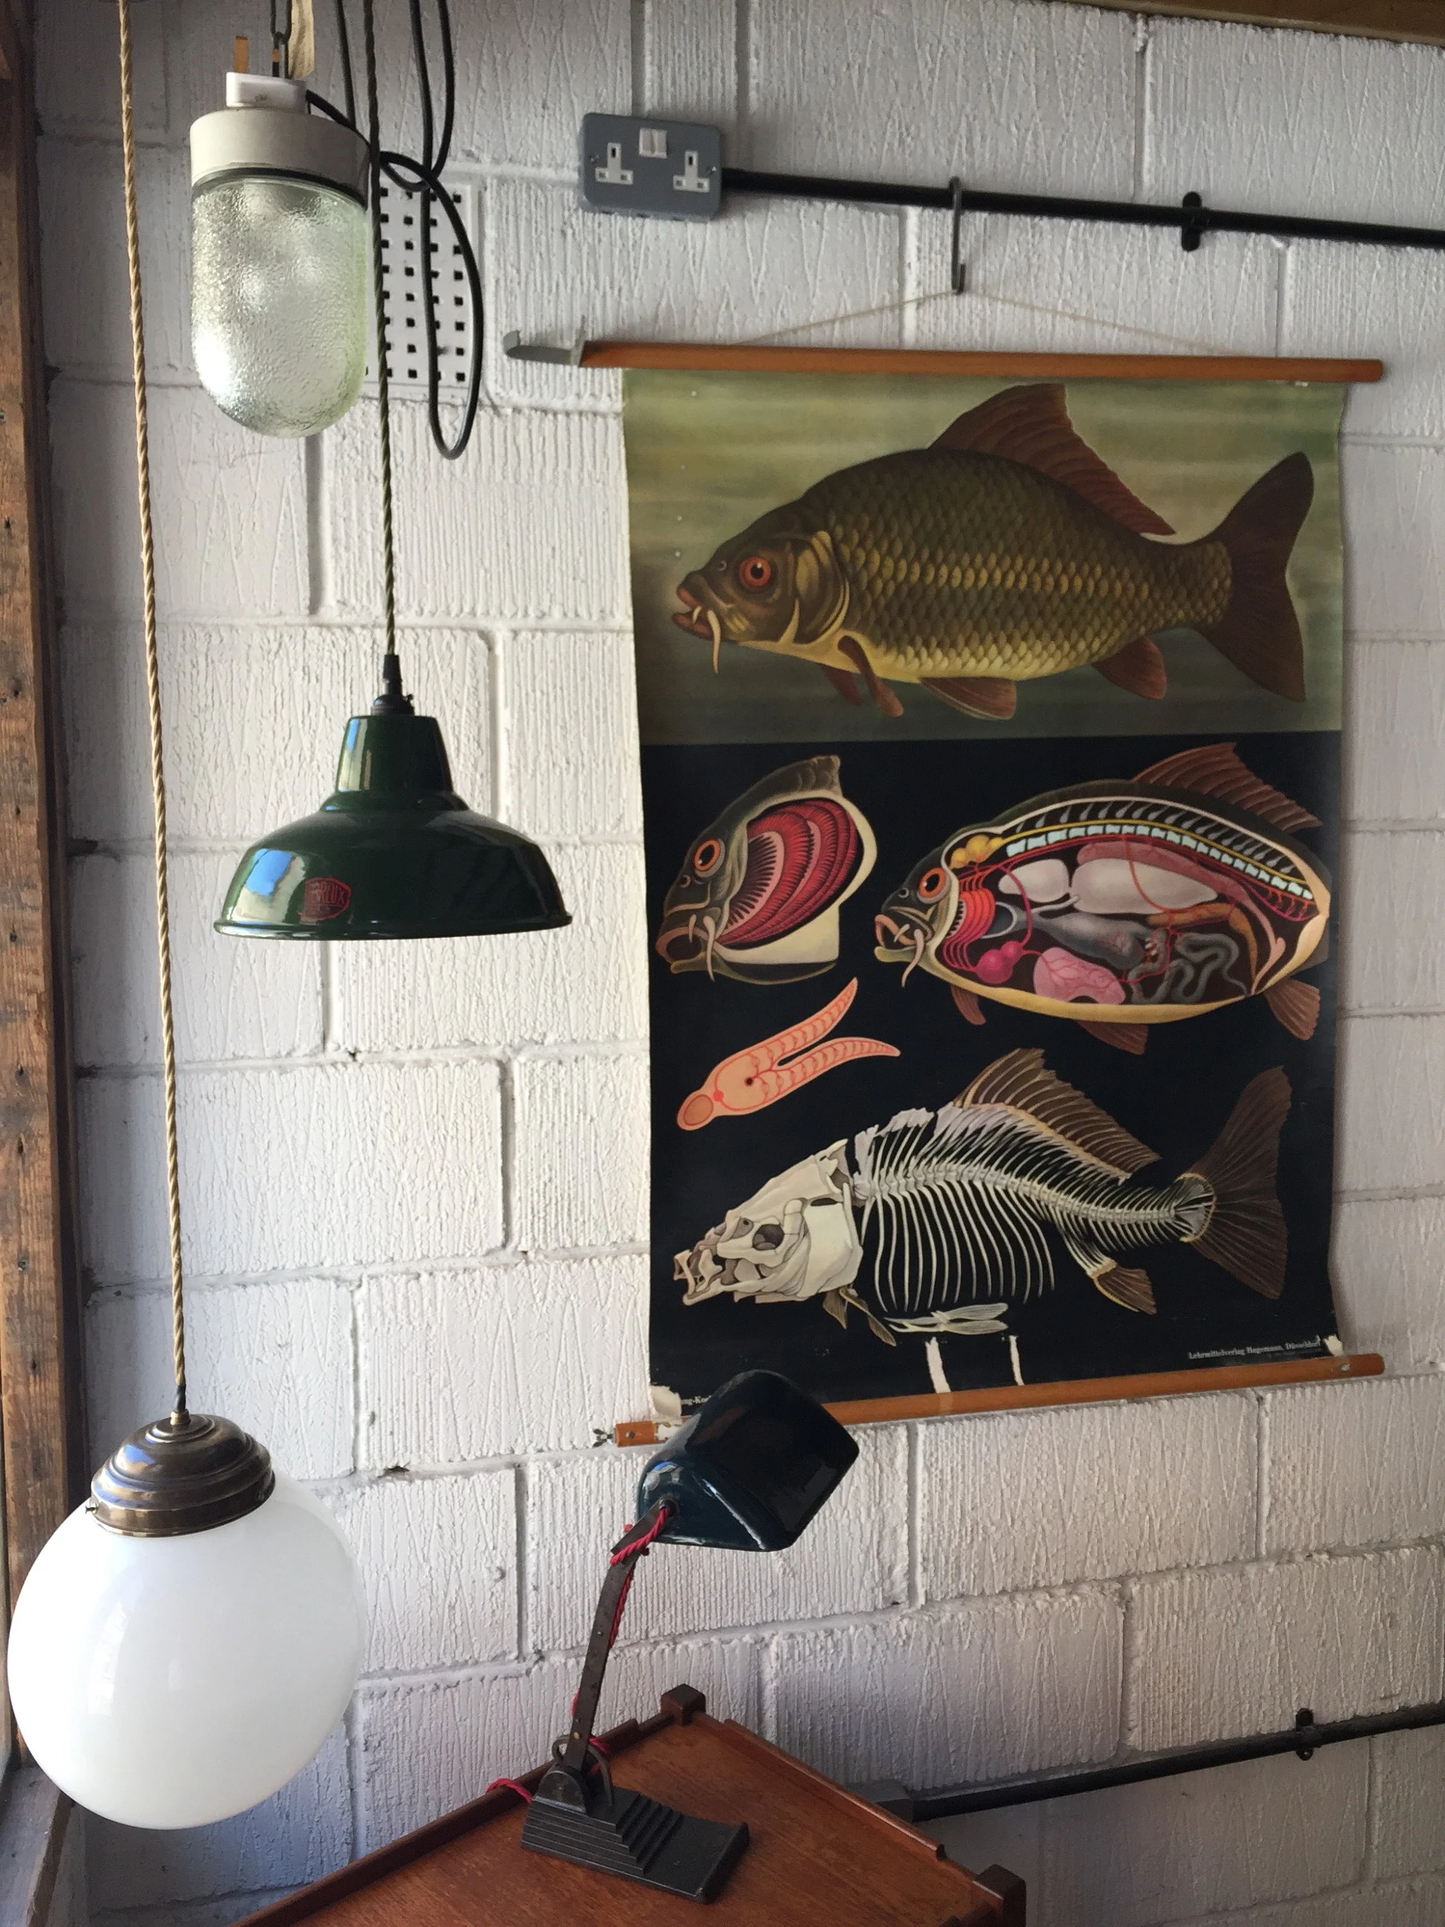 Zoological Educational Wall Chart Of A Carp Fish By Jung Koch Quentell